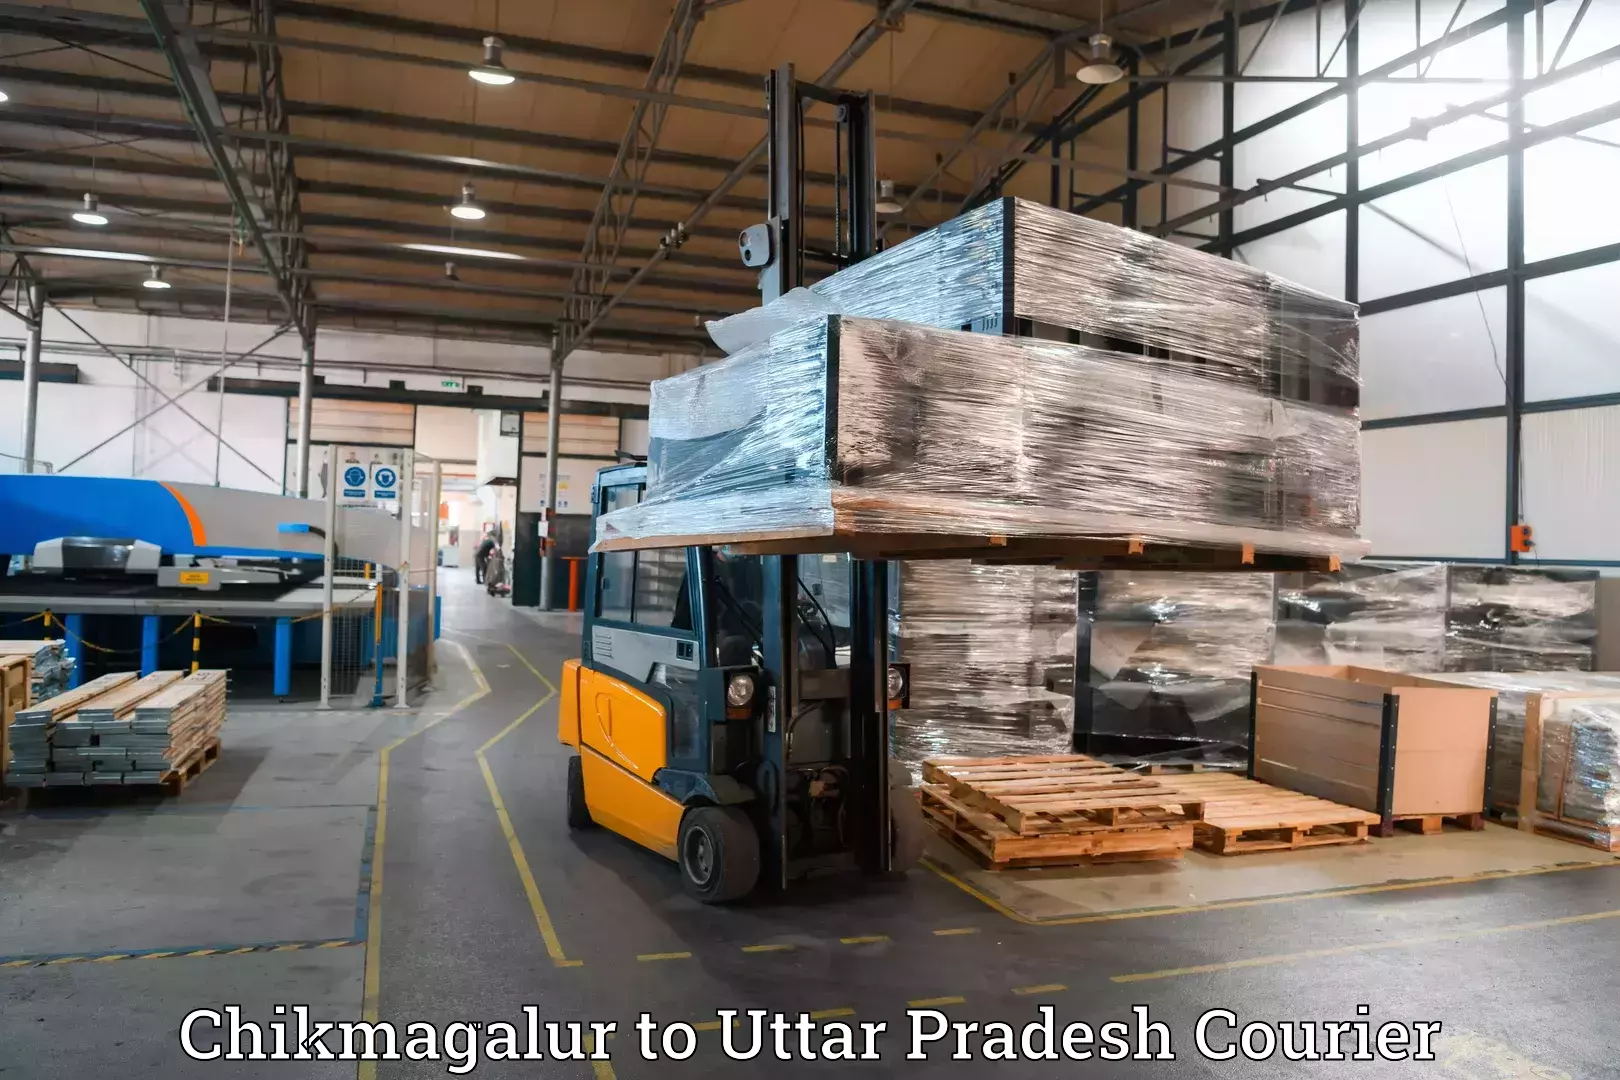 Baggage delivery technology Chikmagalur to Salempur